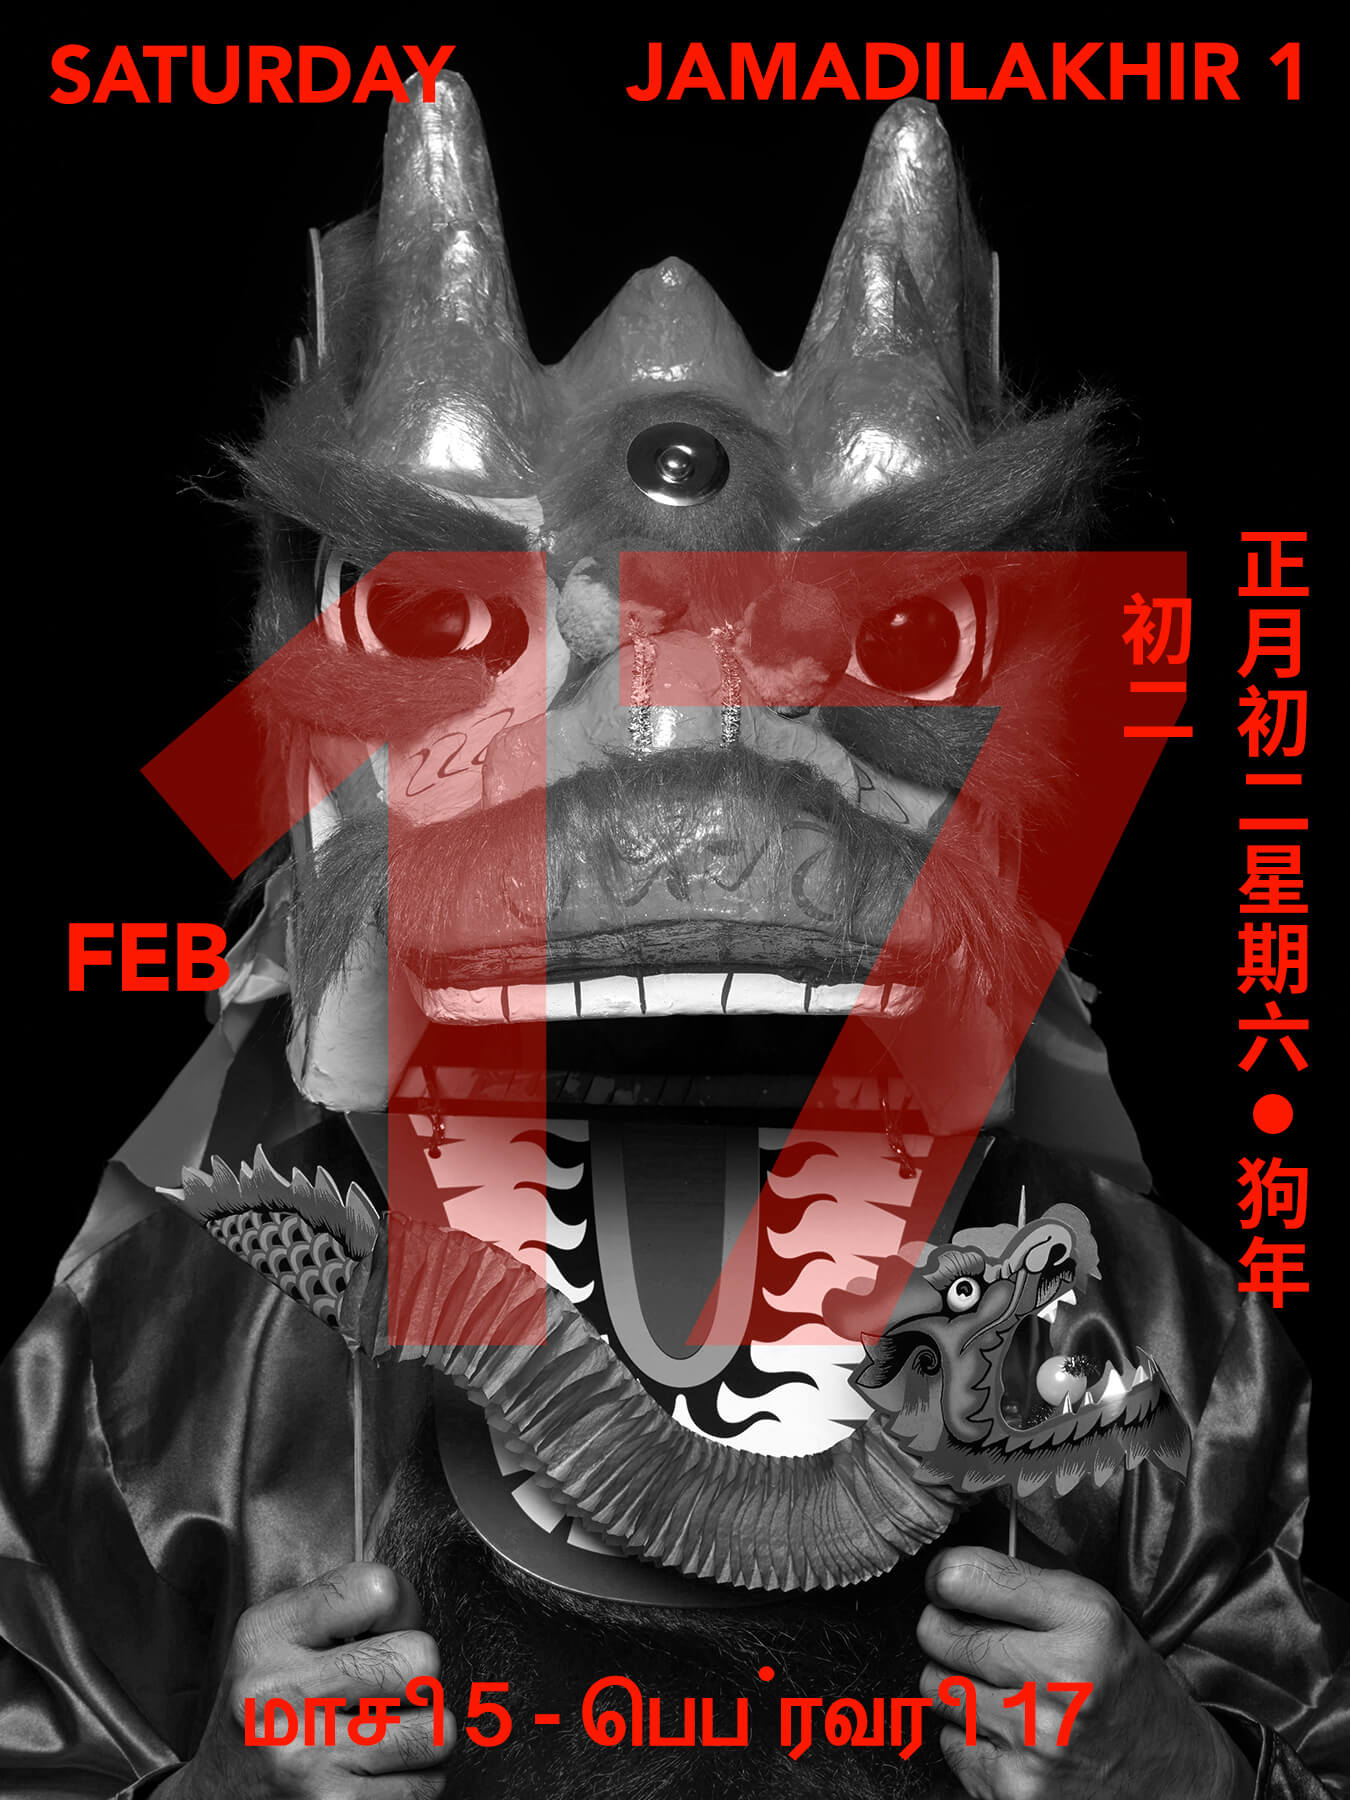 17 Feb 2018 Derong is wearing a Chinese dragon head costume